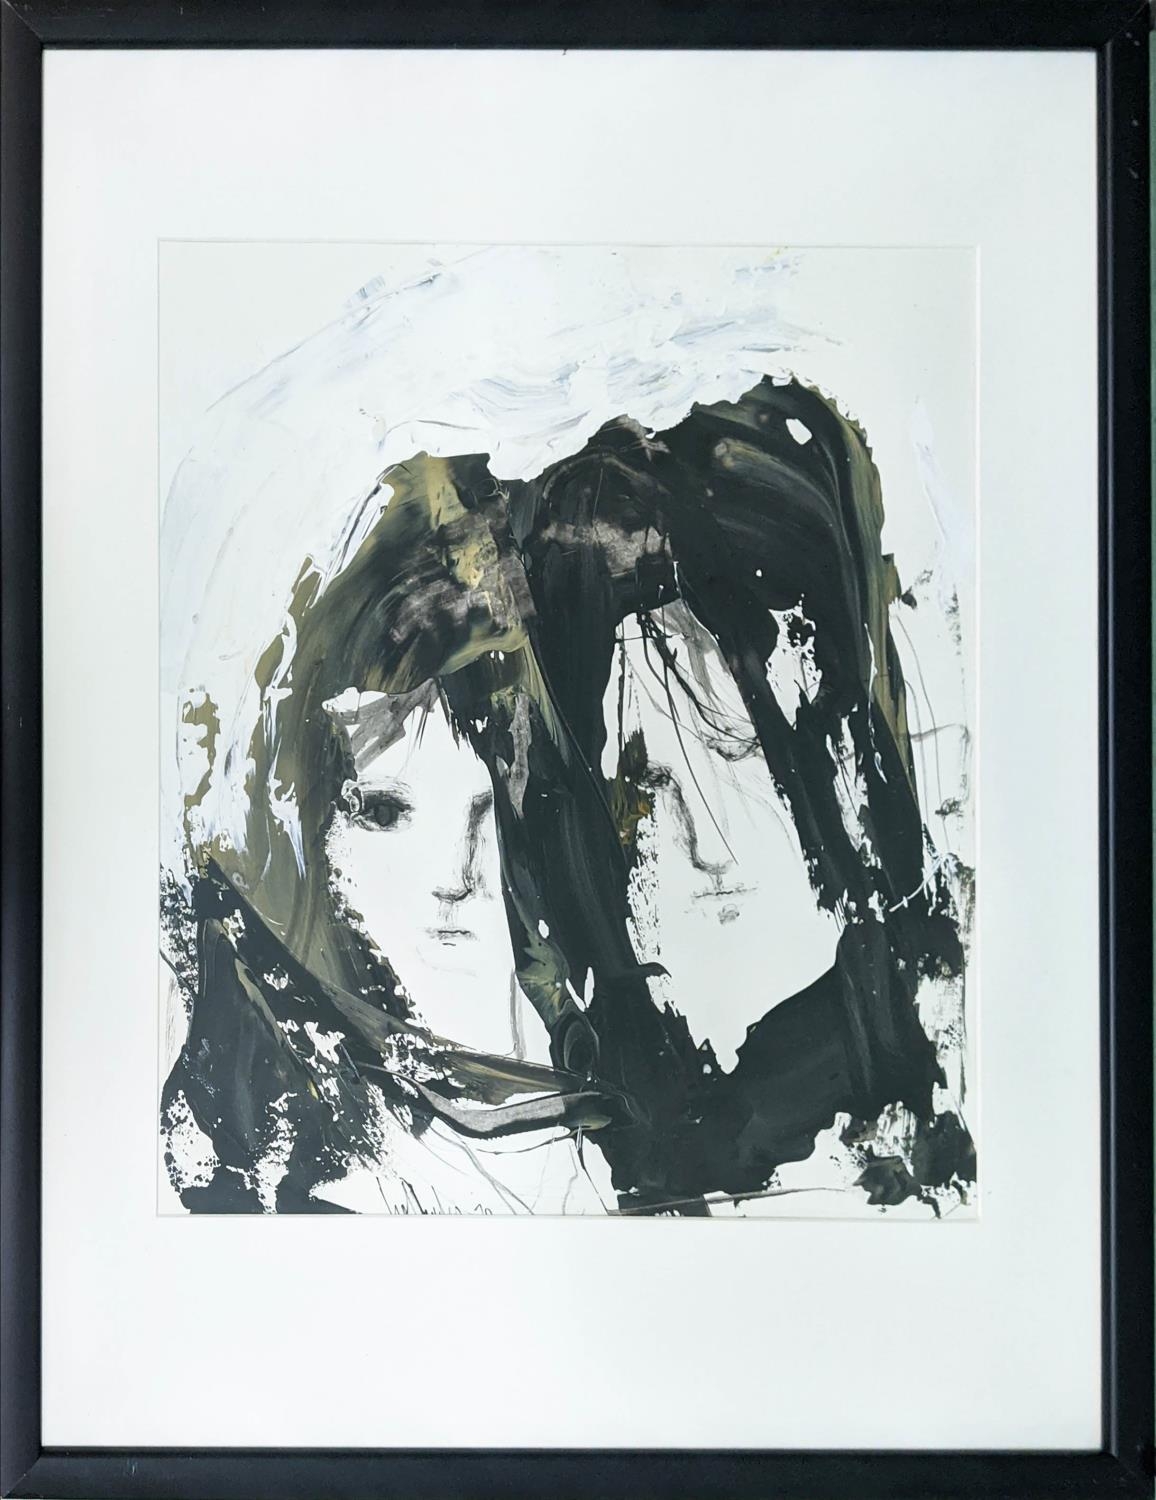 GINO HOLLANDER (American 1924-2015), 'Las dos mujeres', acrylic on paper, 46cm x 41cm, framed.